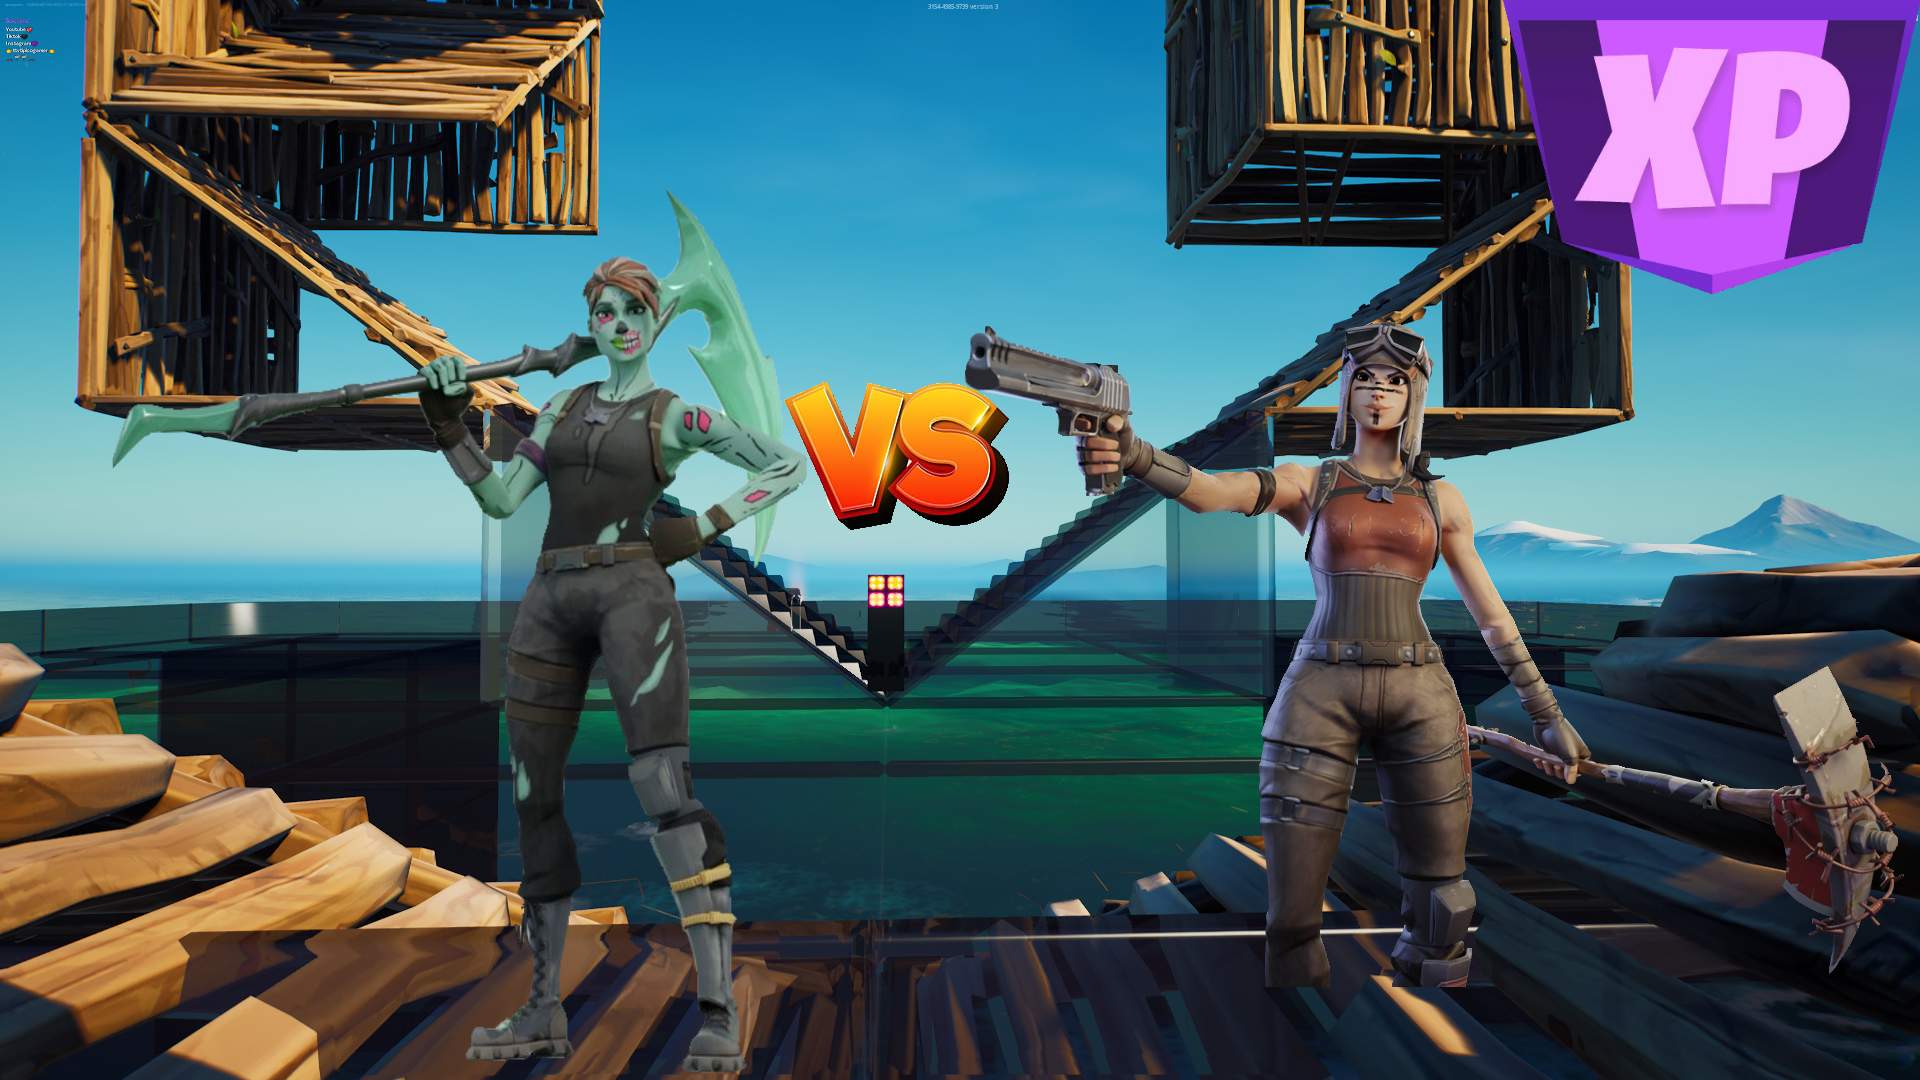 1vs1 Pro Fighting (xp) - Fortnite Creative 1v1, Edit Course, and Map Code